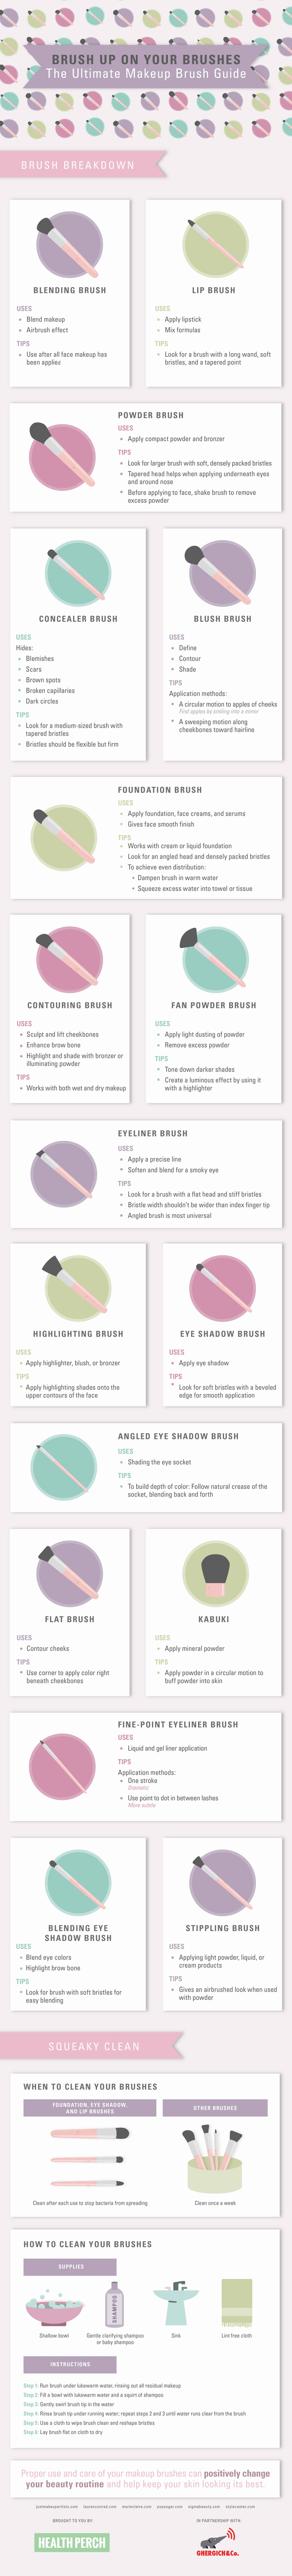 Brush Up on Your Brushes: The Ultimate Makeup Brush Guide Infographic